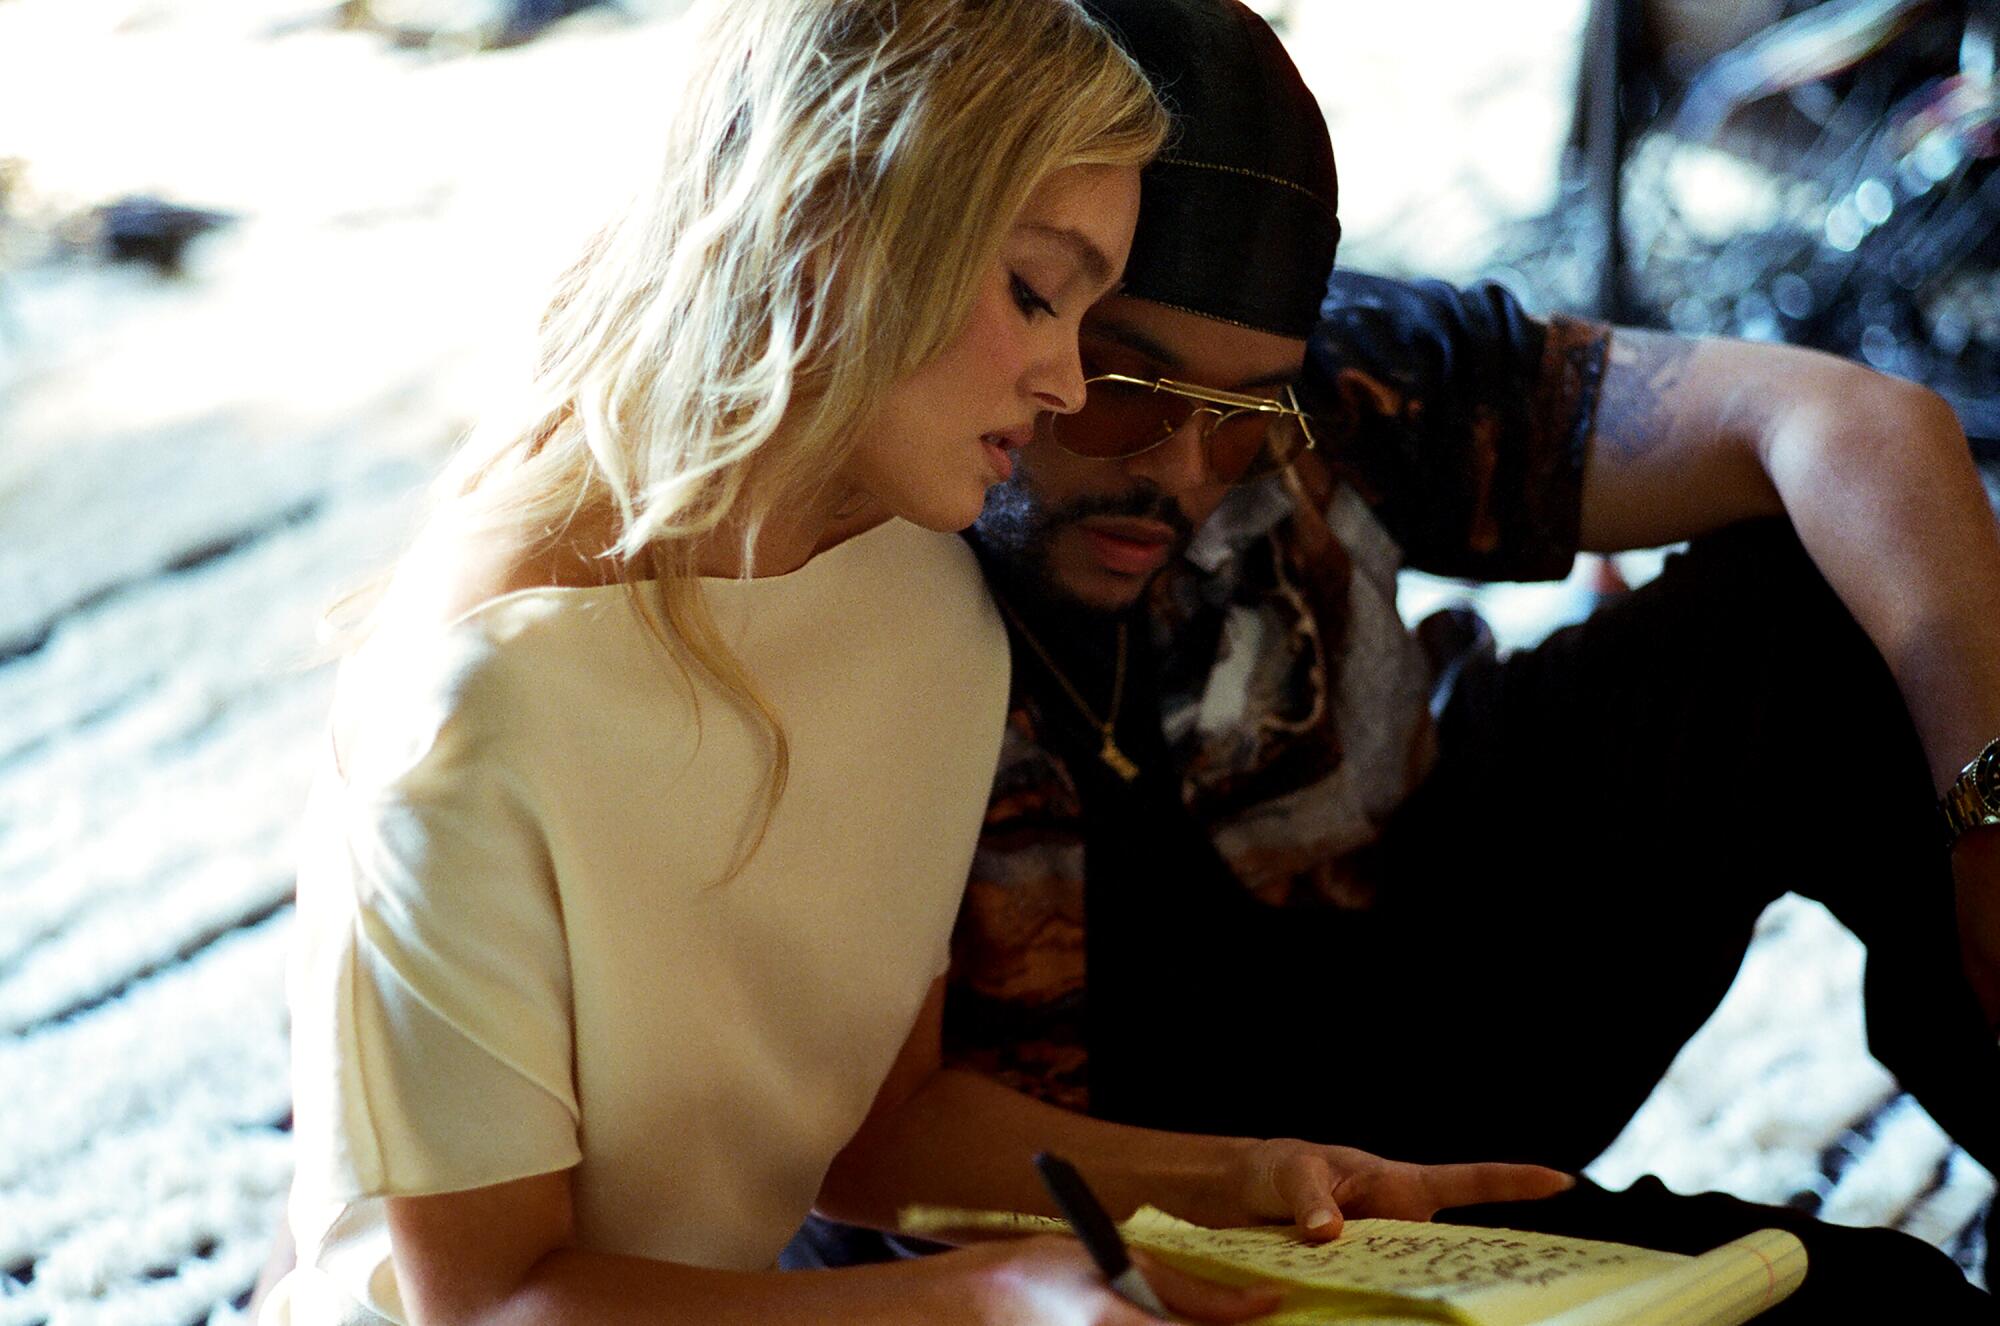 A blonde woman in a white shirt looks at a notebook and a man in dark clothing leans against her left shoulder.